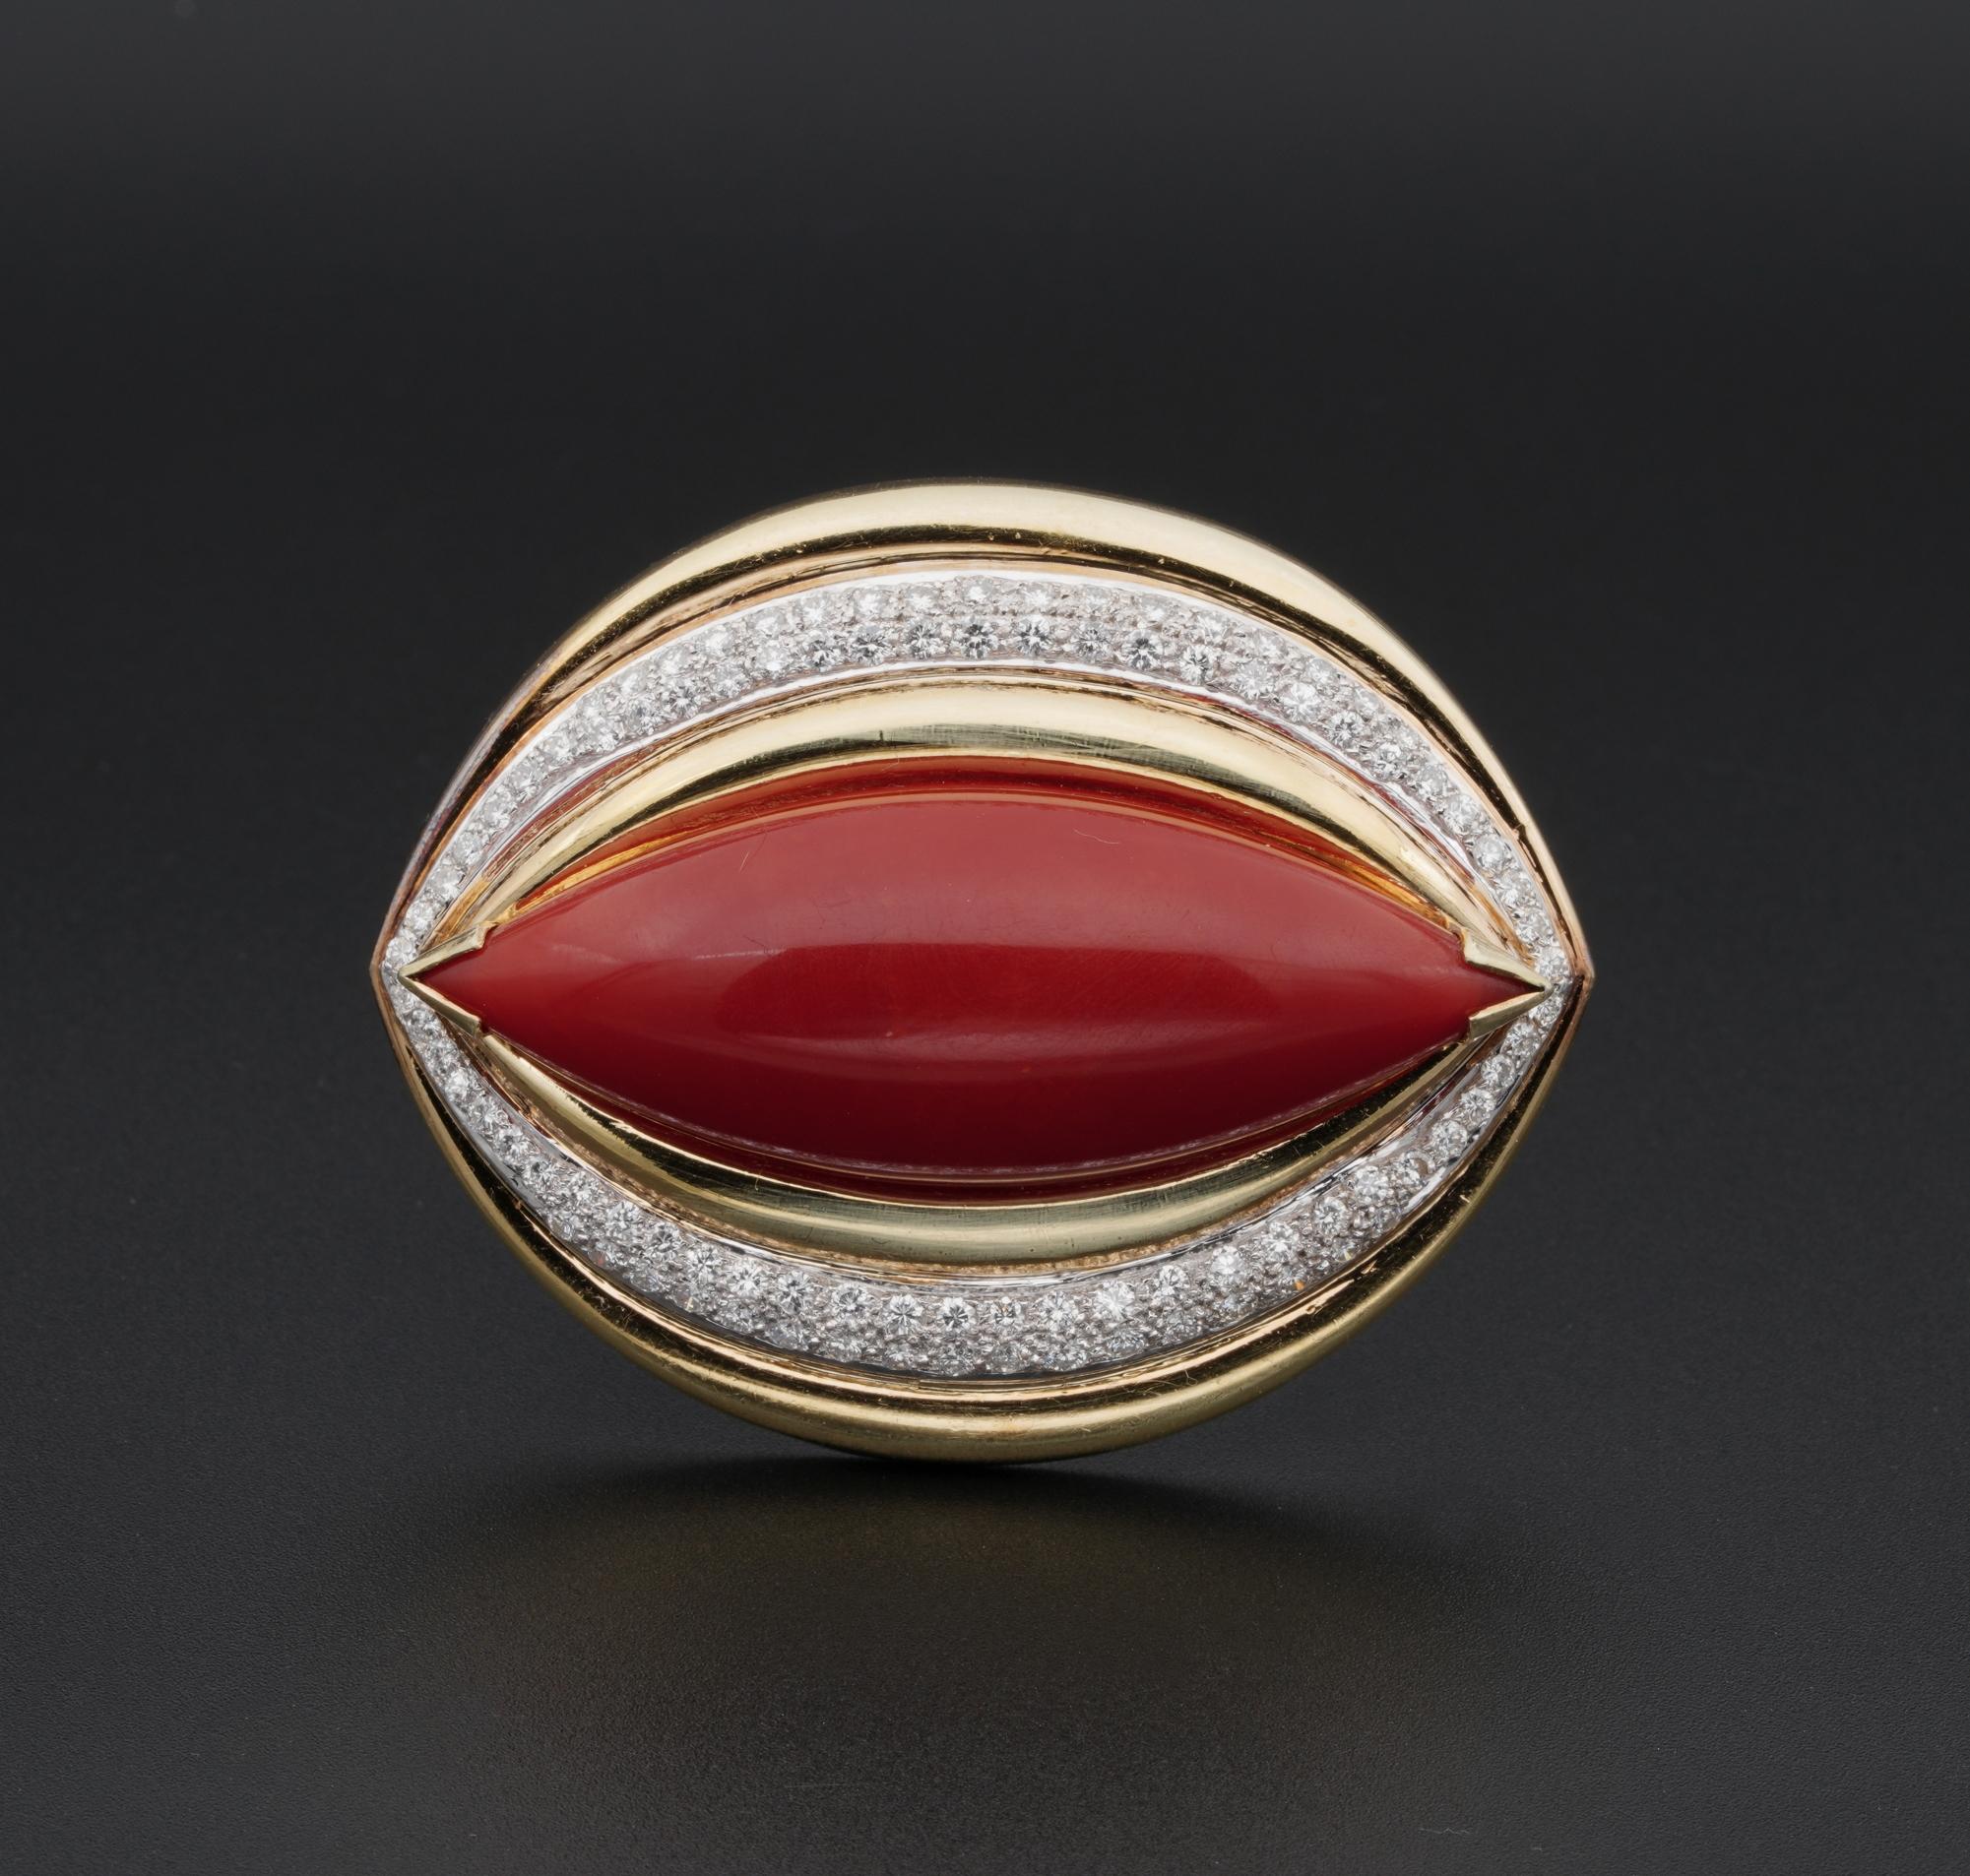 An impressive and quite unique Mid century large Coral & Diamond brooch/ pendant 18 KT solid gold, 1940/50 ca.
Ultra – chic designed to catch the attention reflecting the Glam in vogue Golden Age Hollywood or la Dolce Vita style
Set with a large